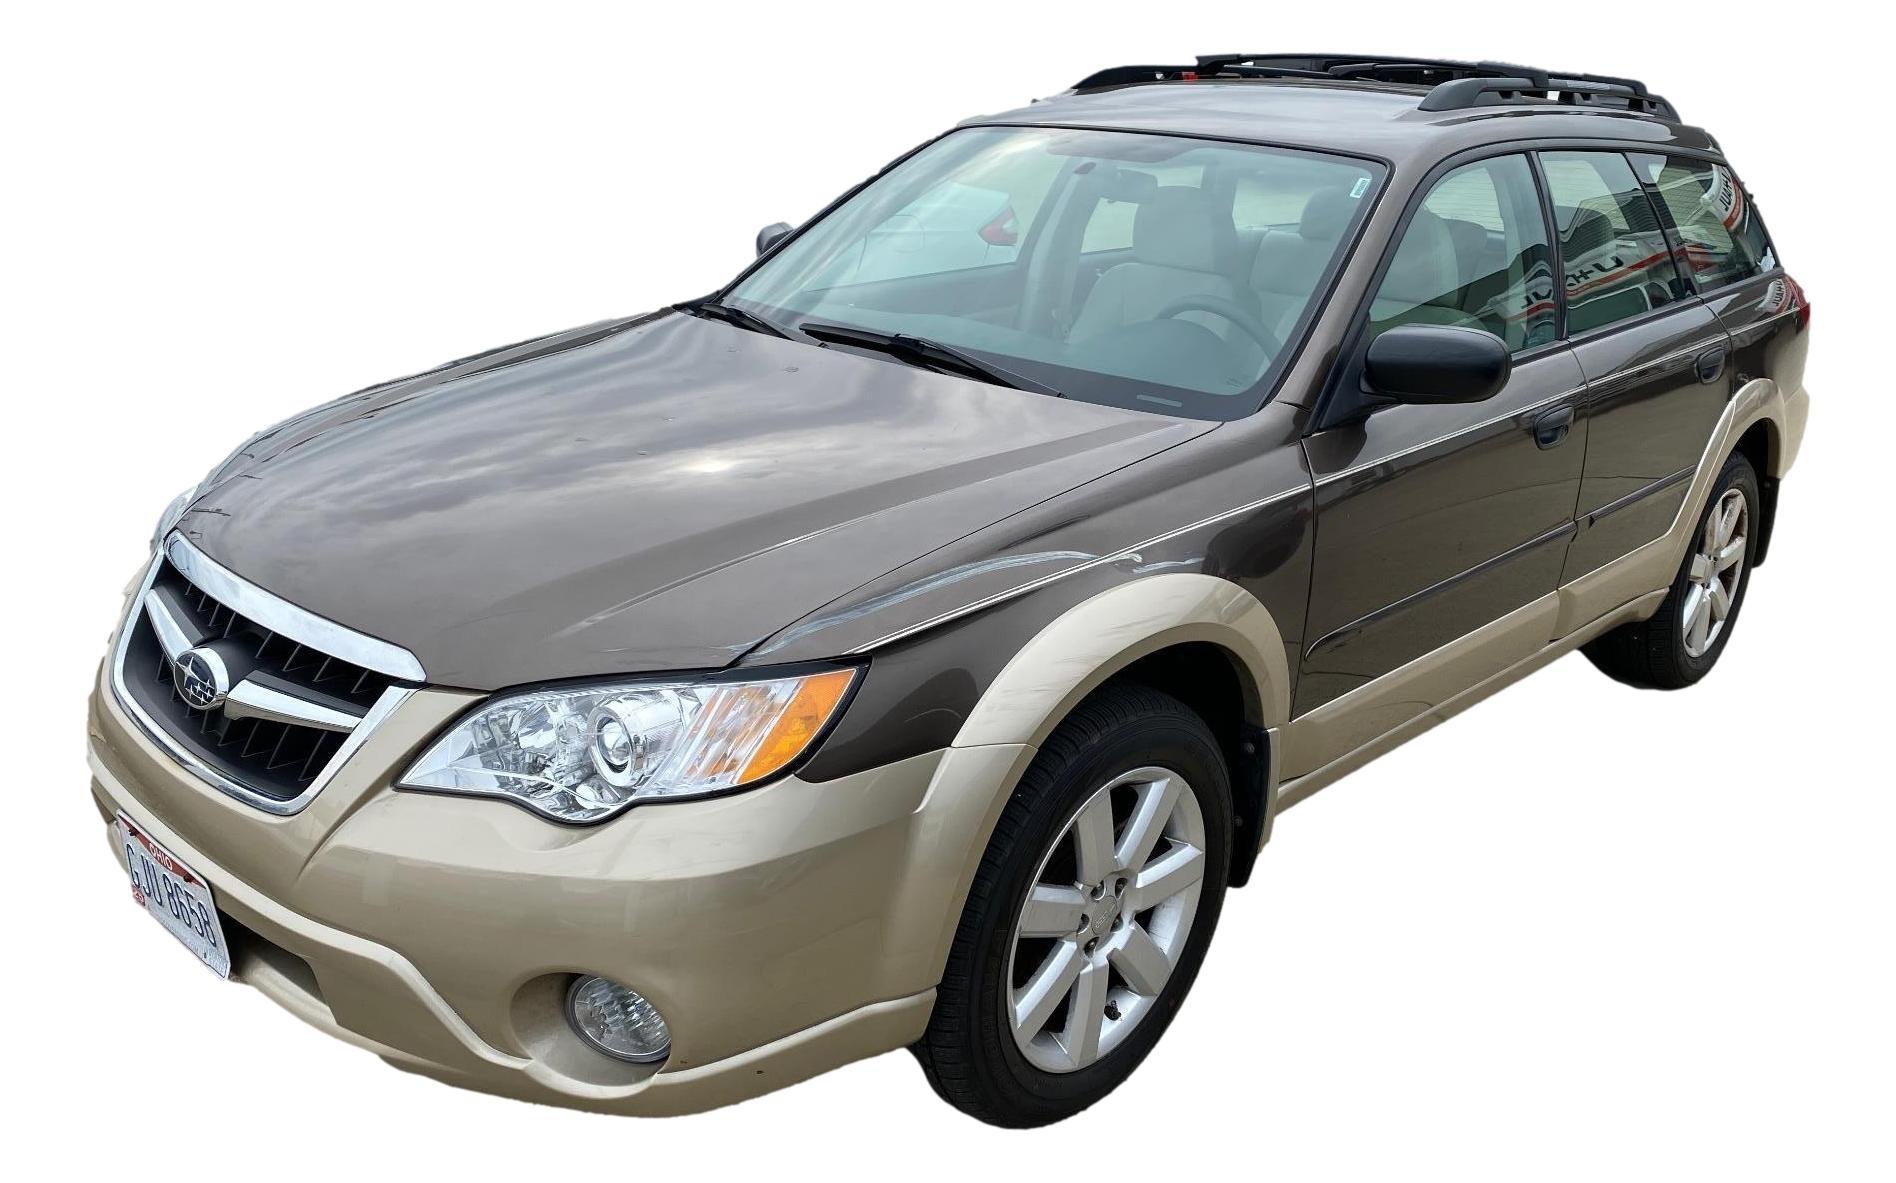 Lot - 2008 Subaru Outback, 32,993 miles, body damage to right side, VIN  #4S4BP61C187311693